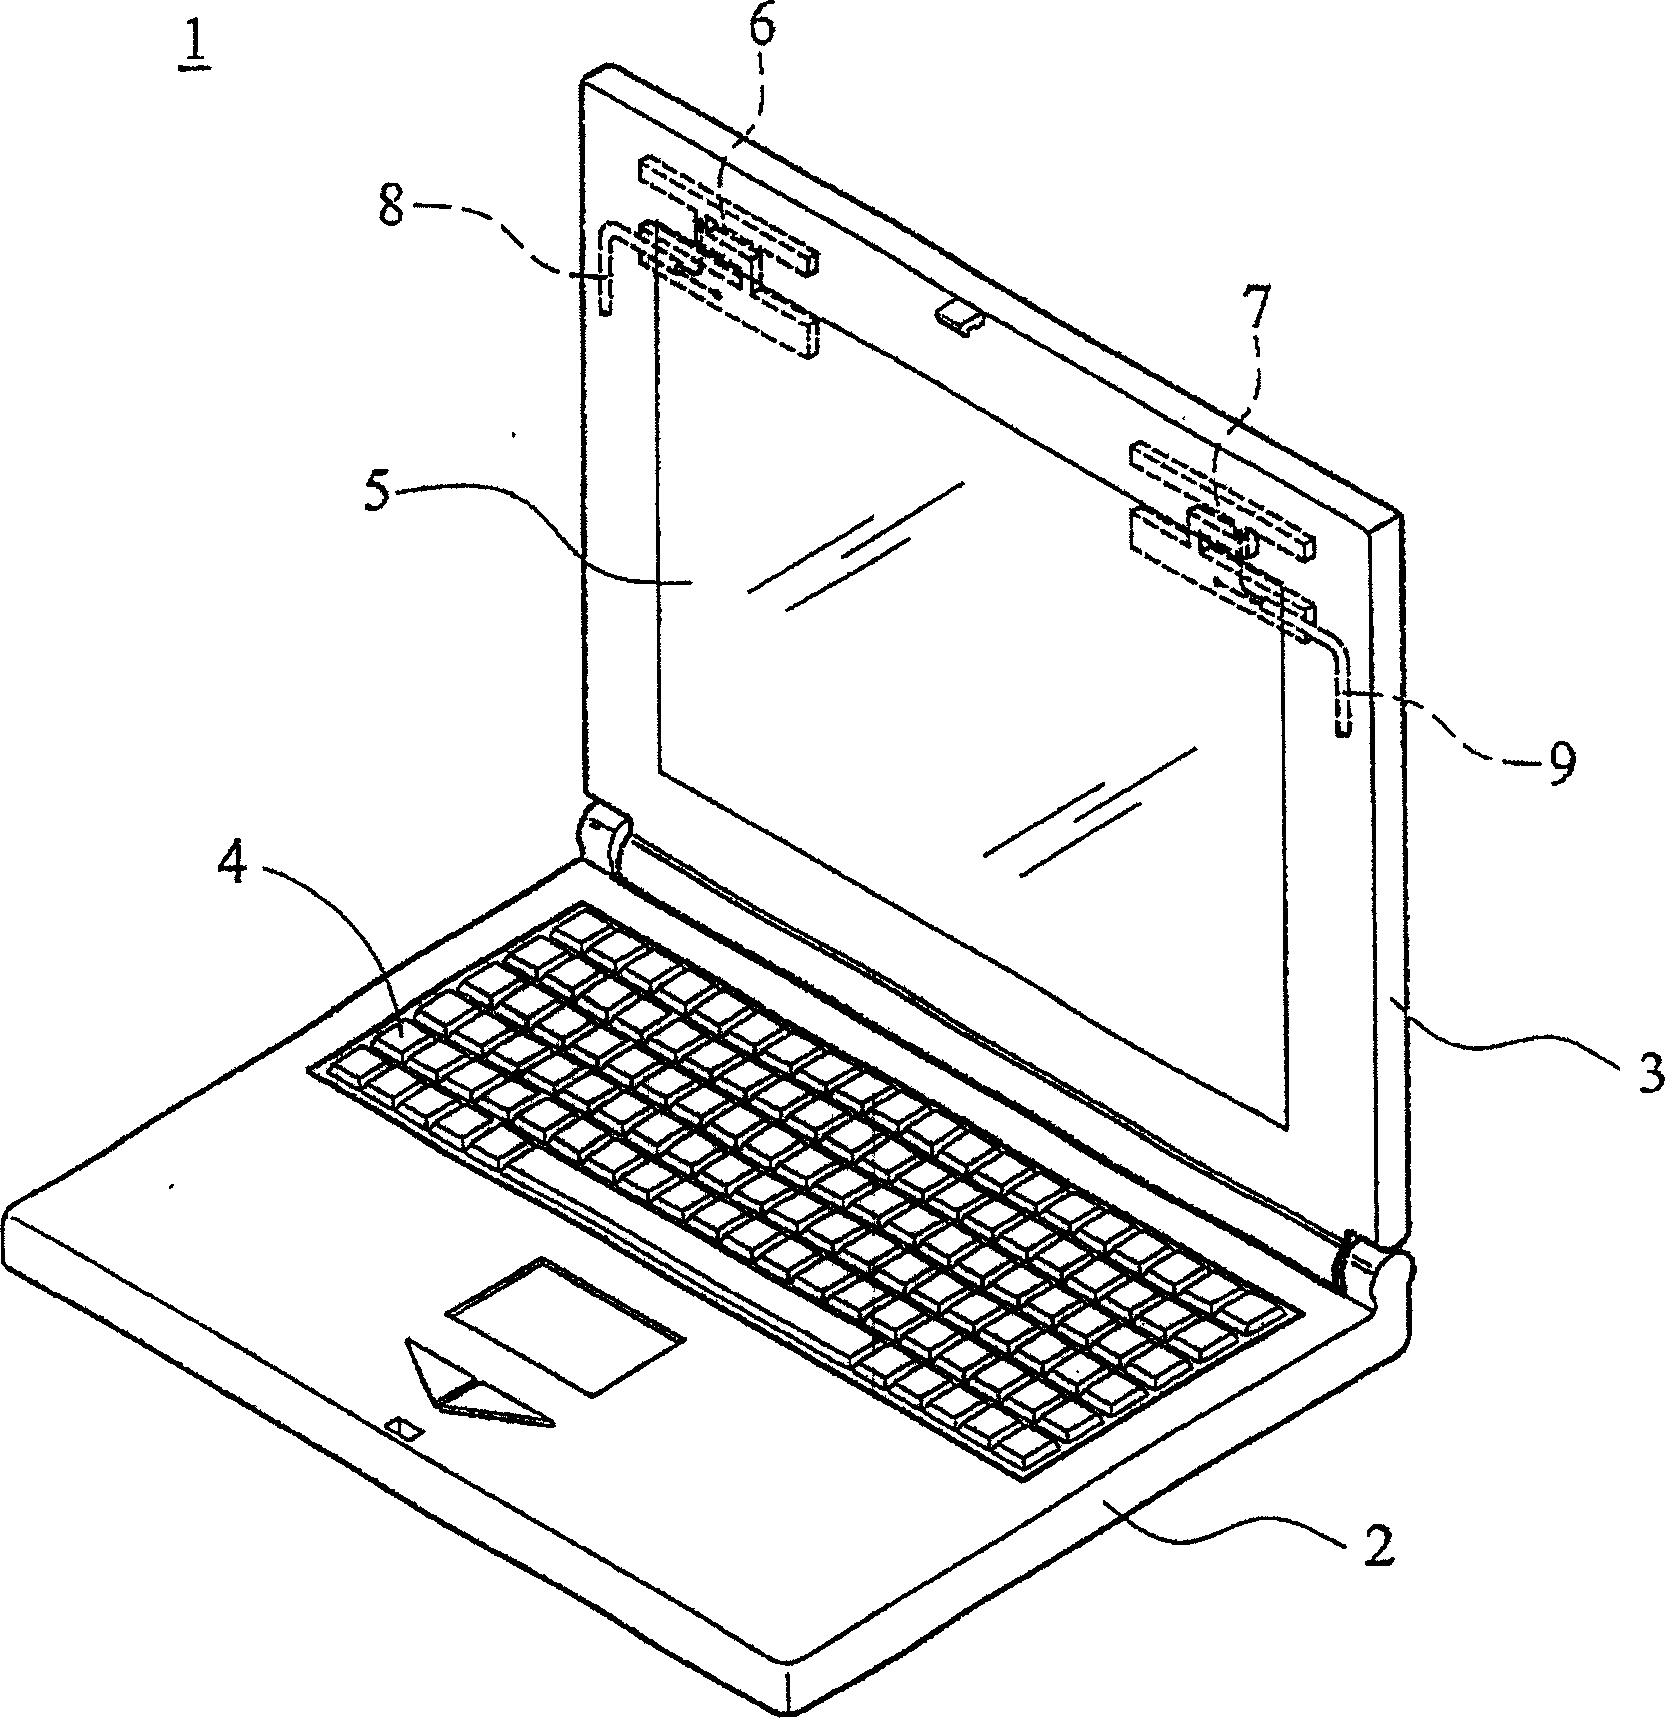 Notebook computer and its antenna structure